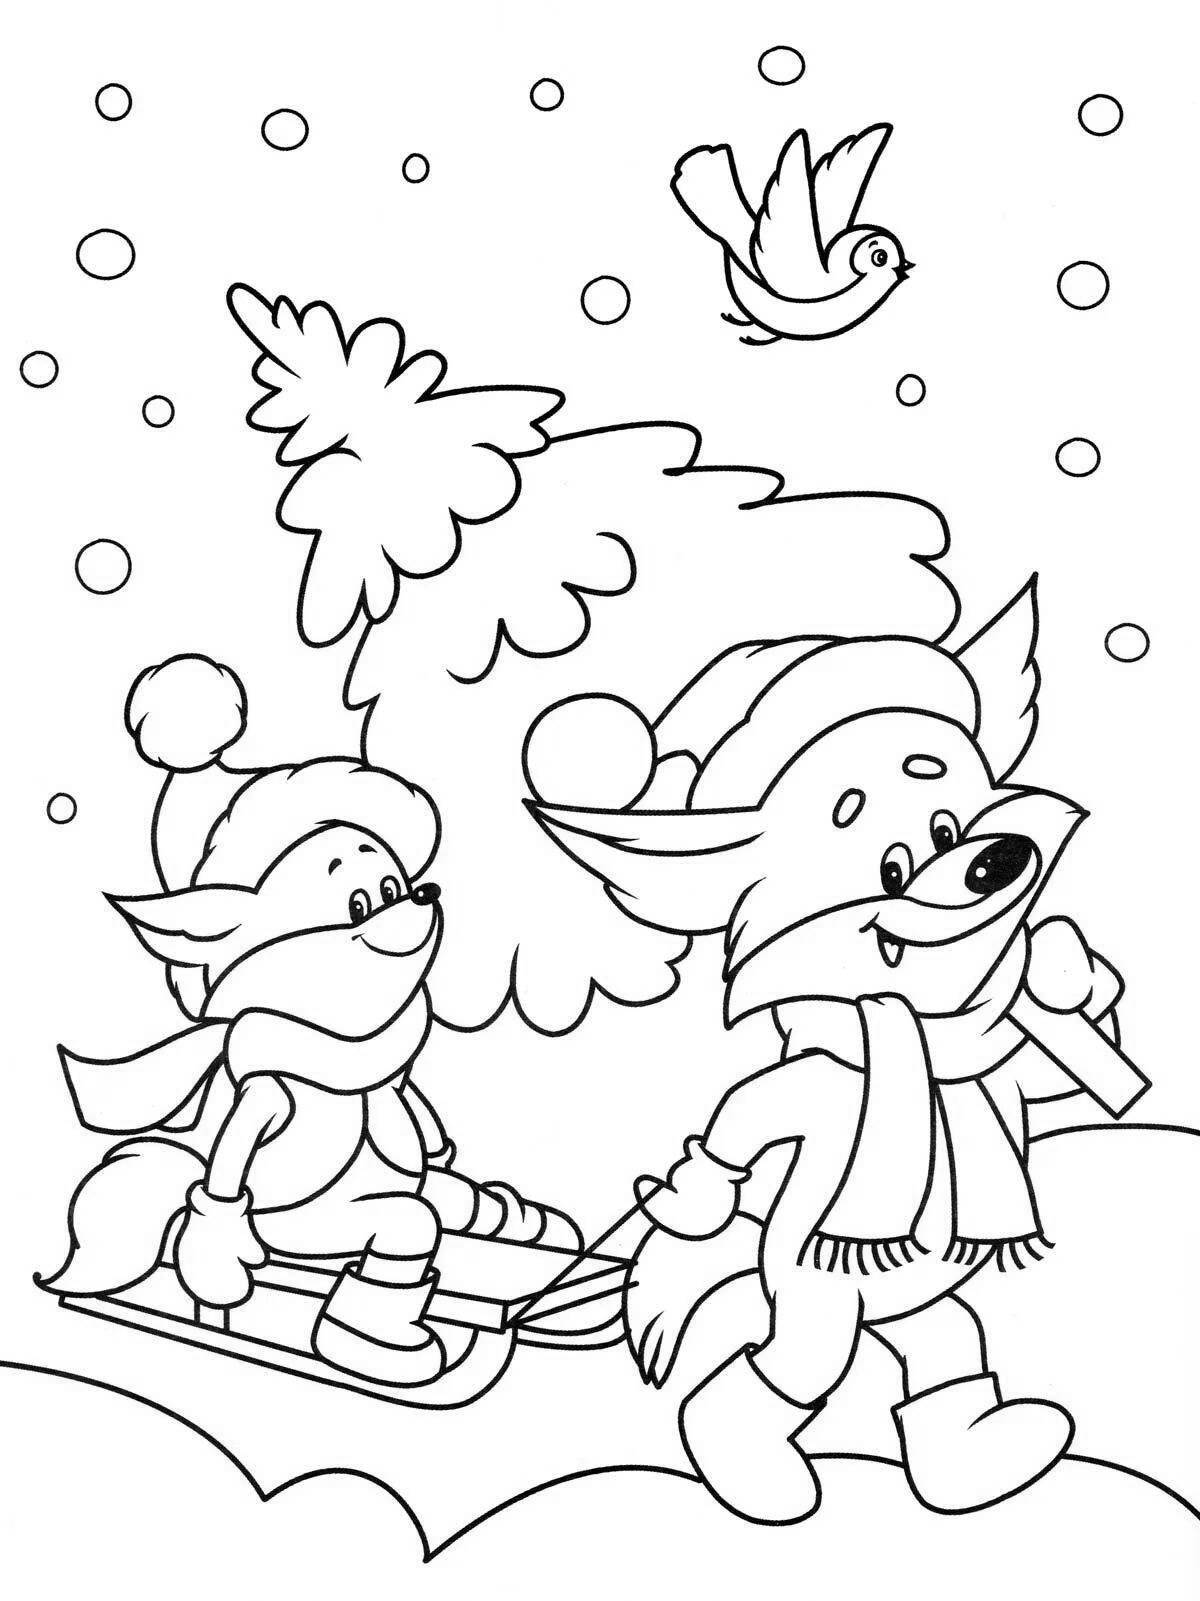 Delightful winter coloring book for children 3-4 years old